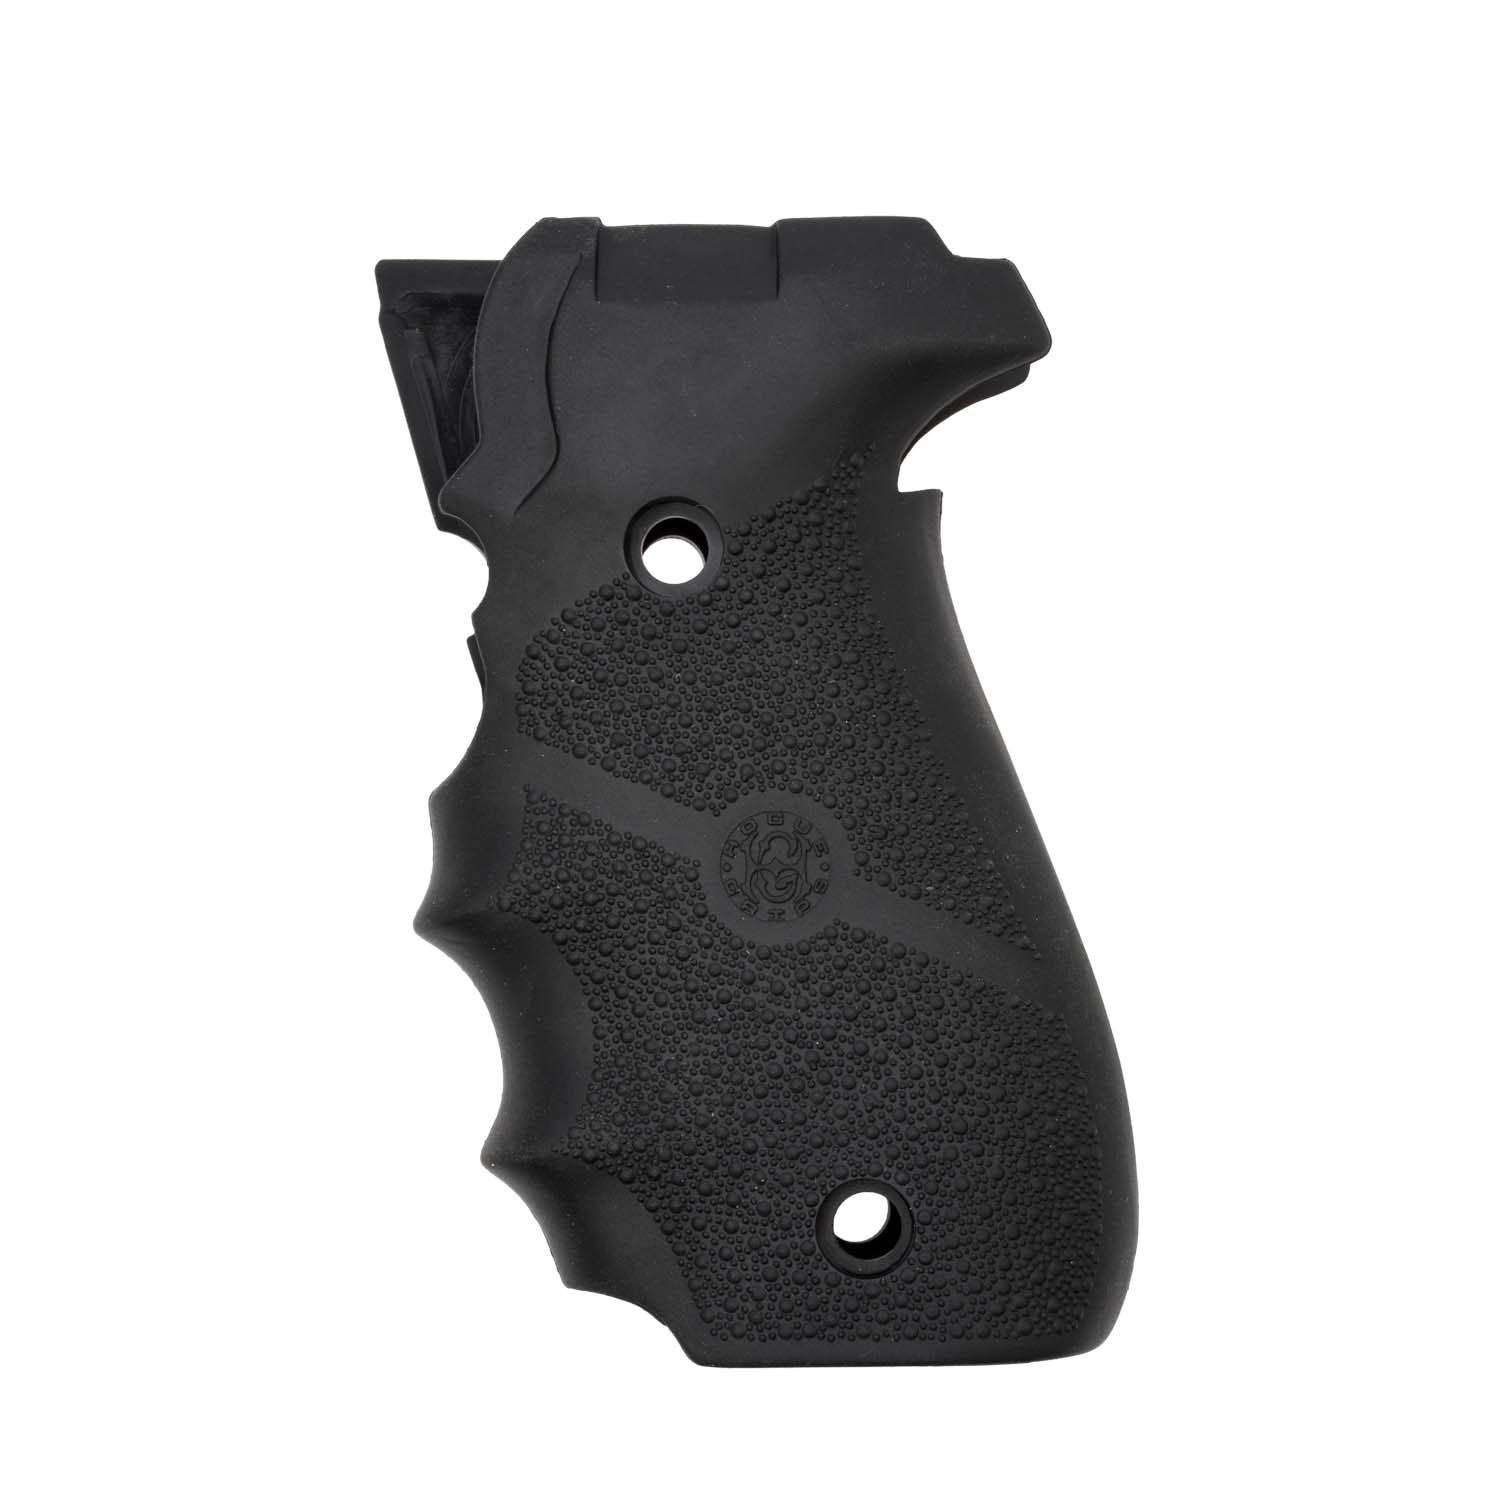 New Hogue Grips for Sig Sauer P226 26000 Molded Black Rubber with Finger Grooves 